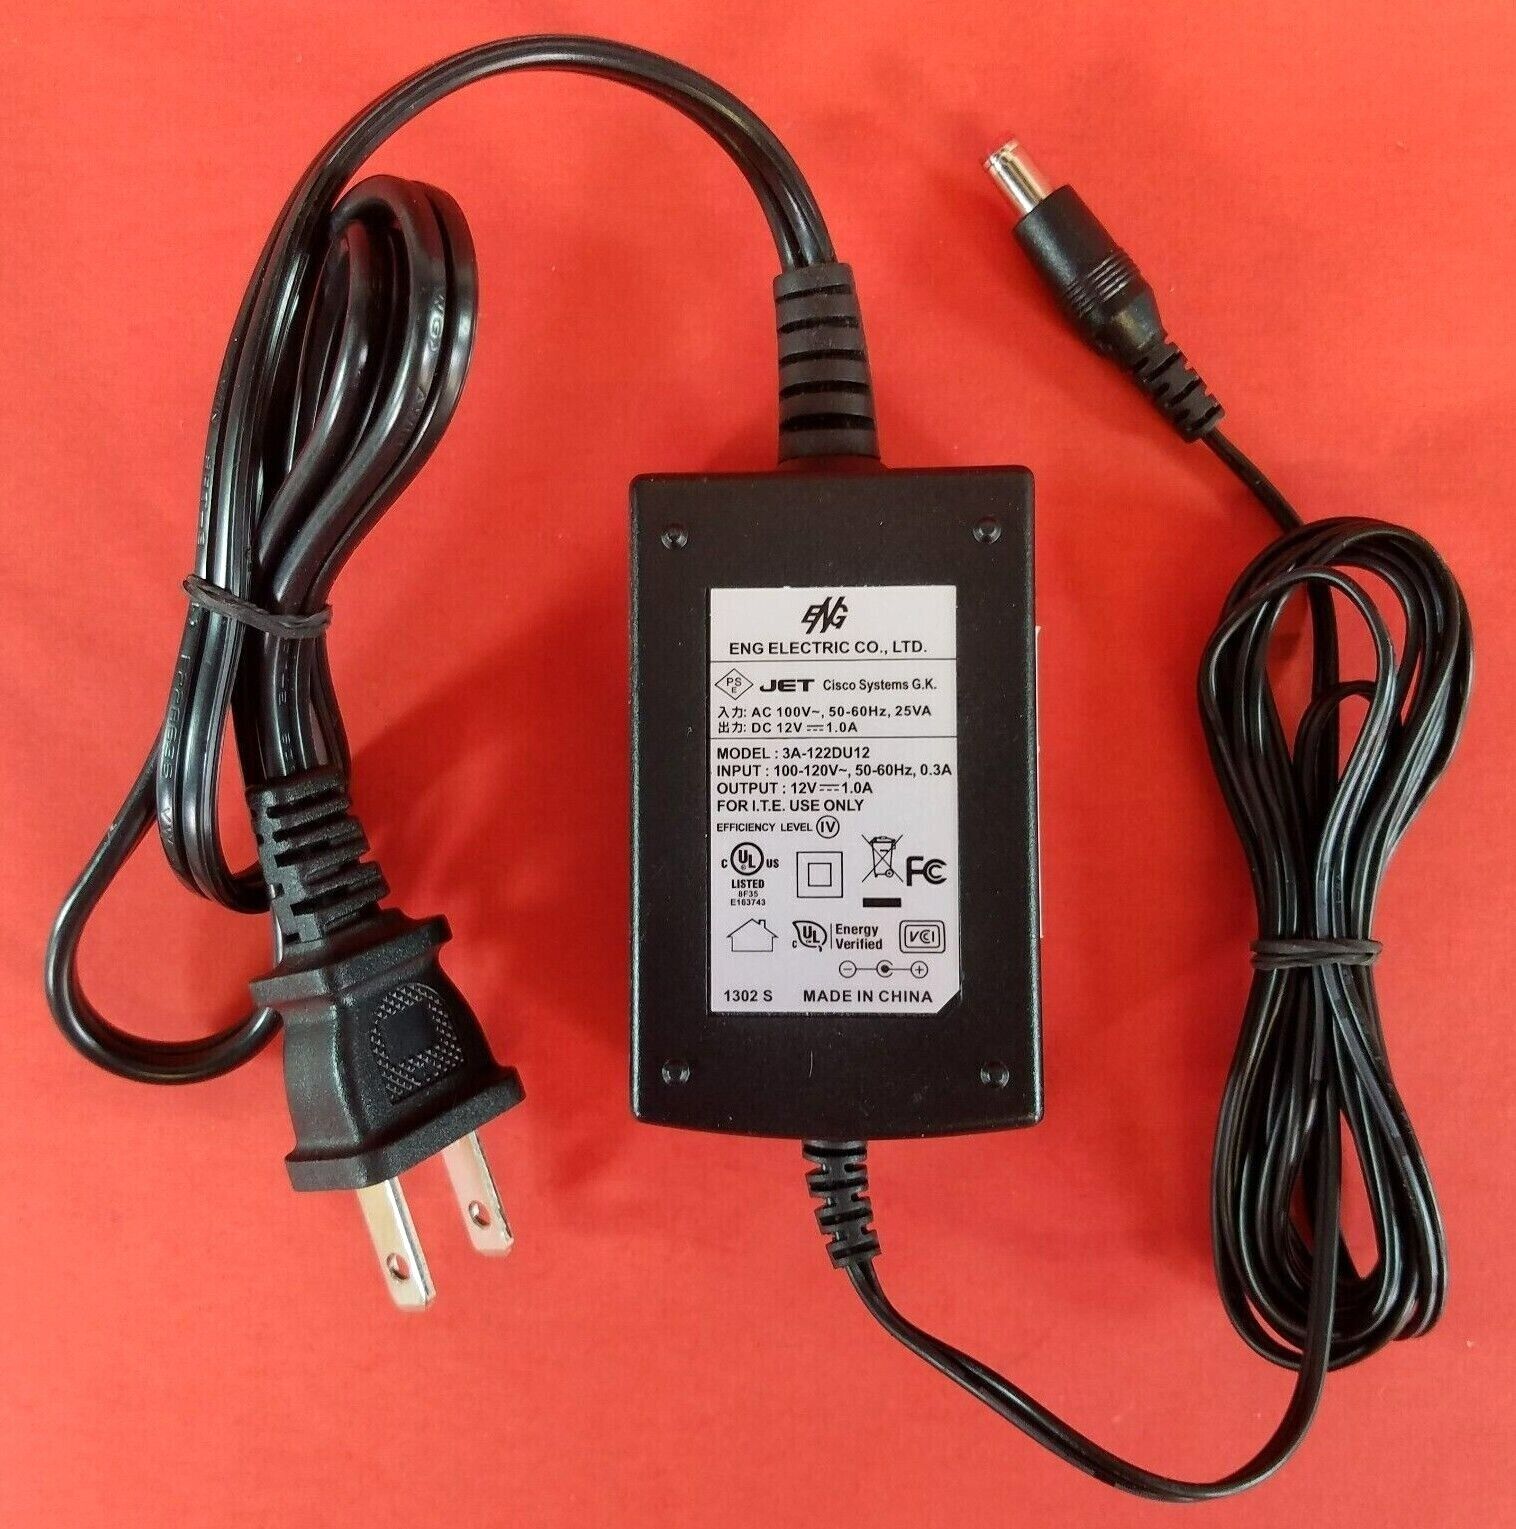 *Brand NEW* ENG Electric 3A-122DU12 Power Supply Adaptor 12V - 1A OEM AC/DC Adapter